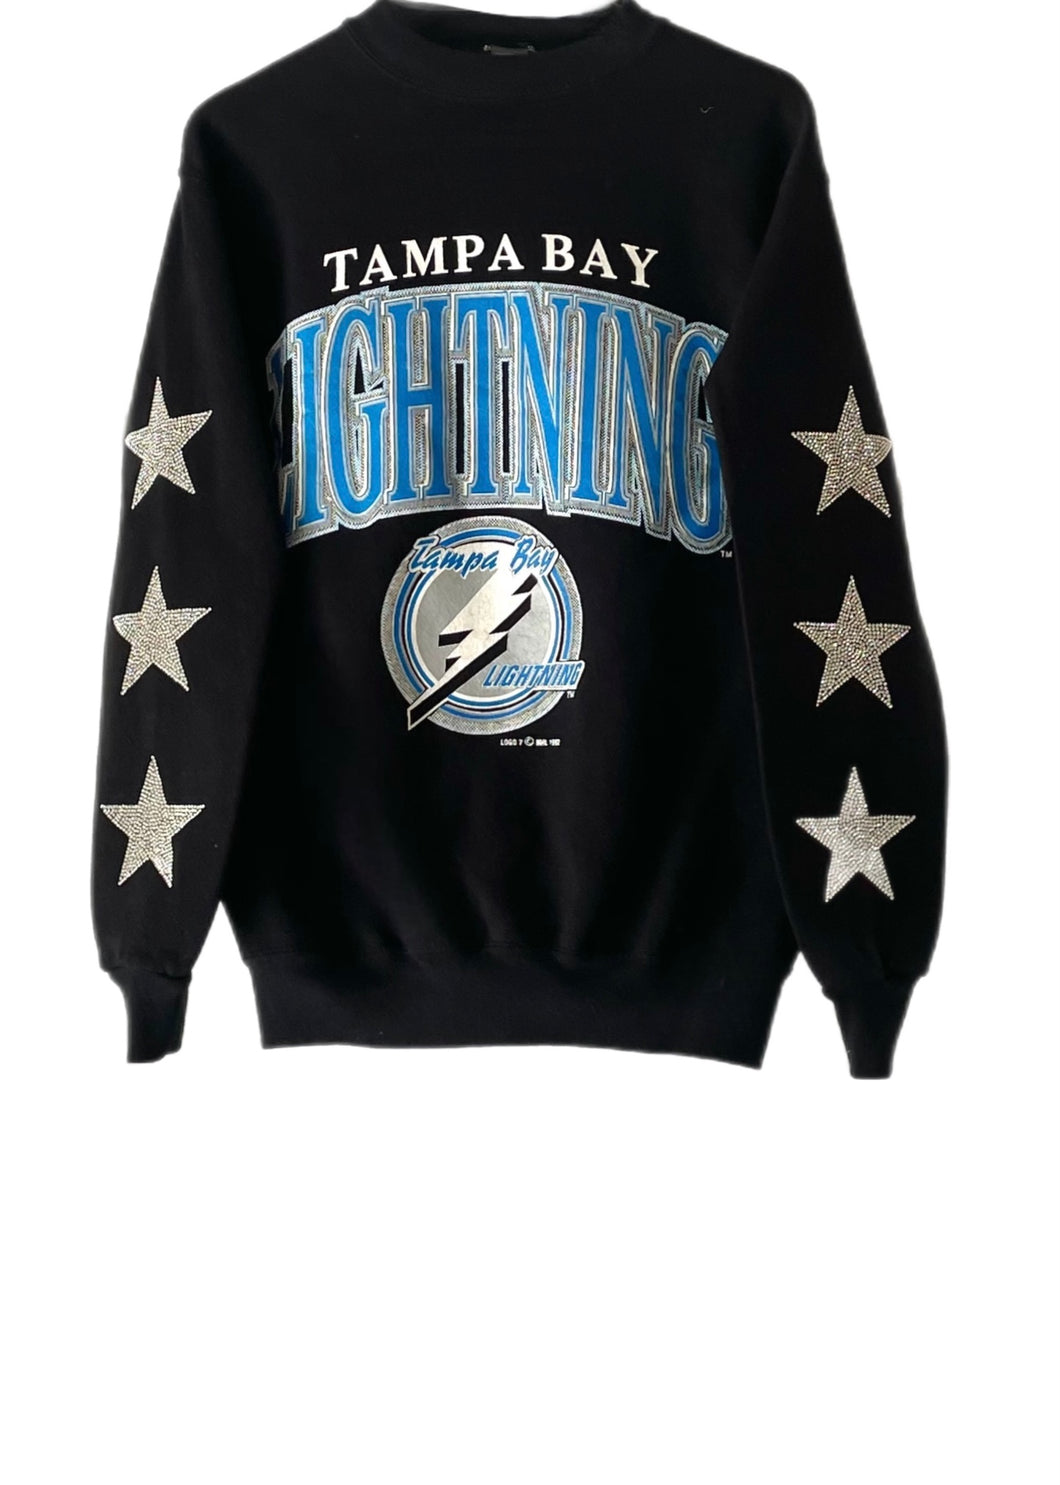 Tampa Bay Lightning, NHL One of a KIND Vintage “Rare Find” Sweatshirt with Three Crystal Star Design